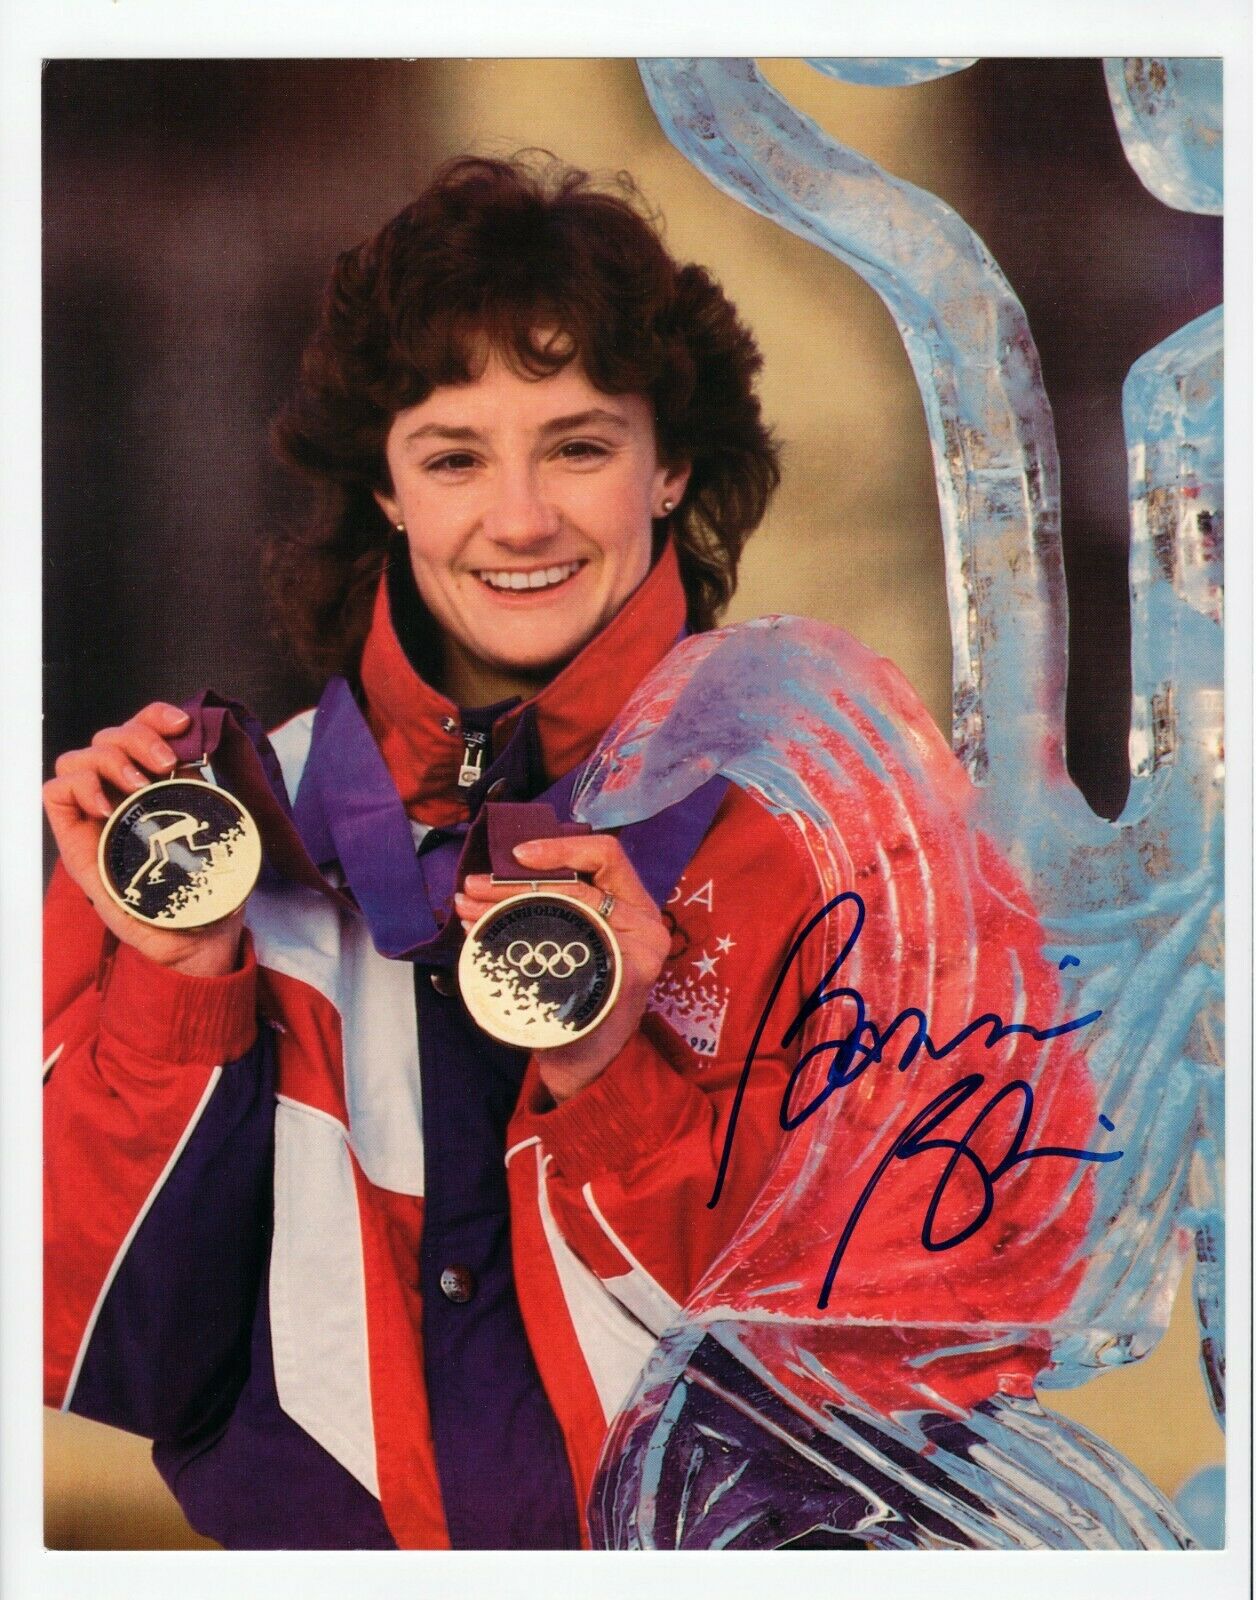 Bonnie Blair Autograph 8x10 Color Photo 5 Olympic Gold Medals Speed Skater